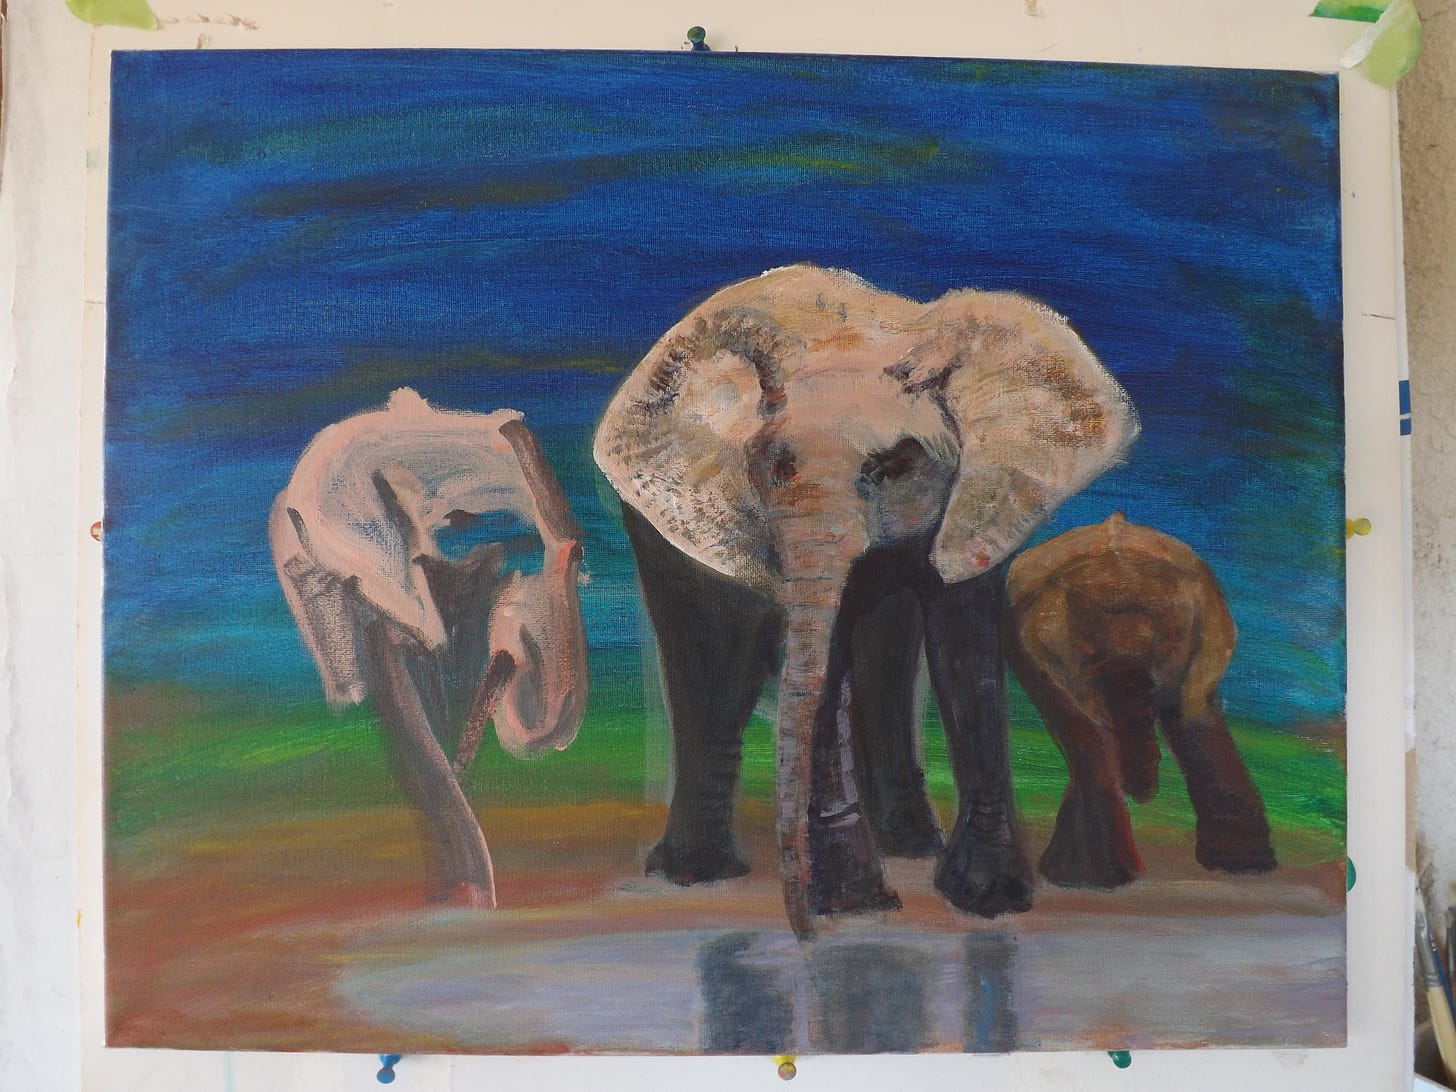 Painting by Sherry Killam Arts depicting three elephants at a water hole, one baby just a sketch of a skeleton.